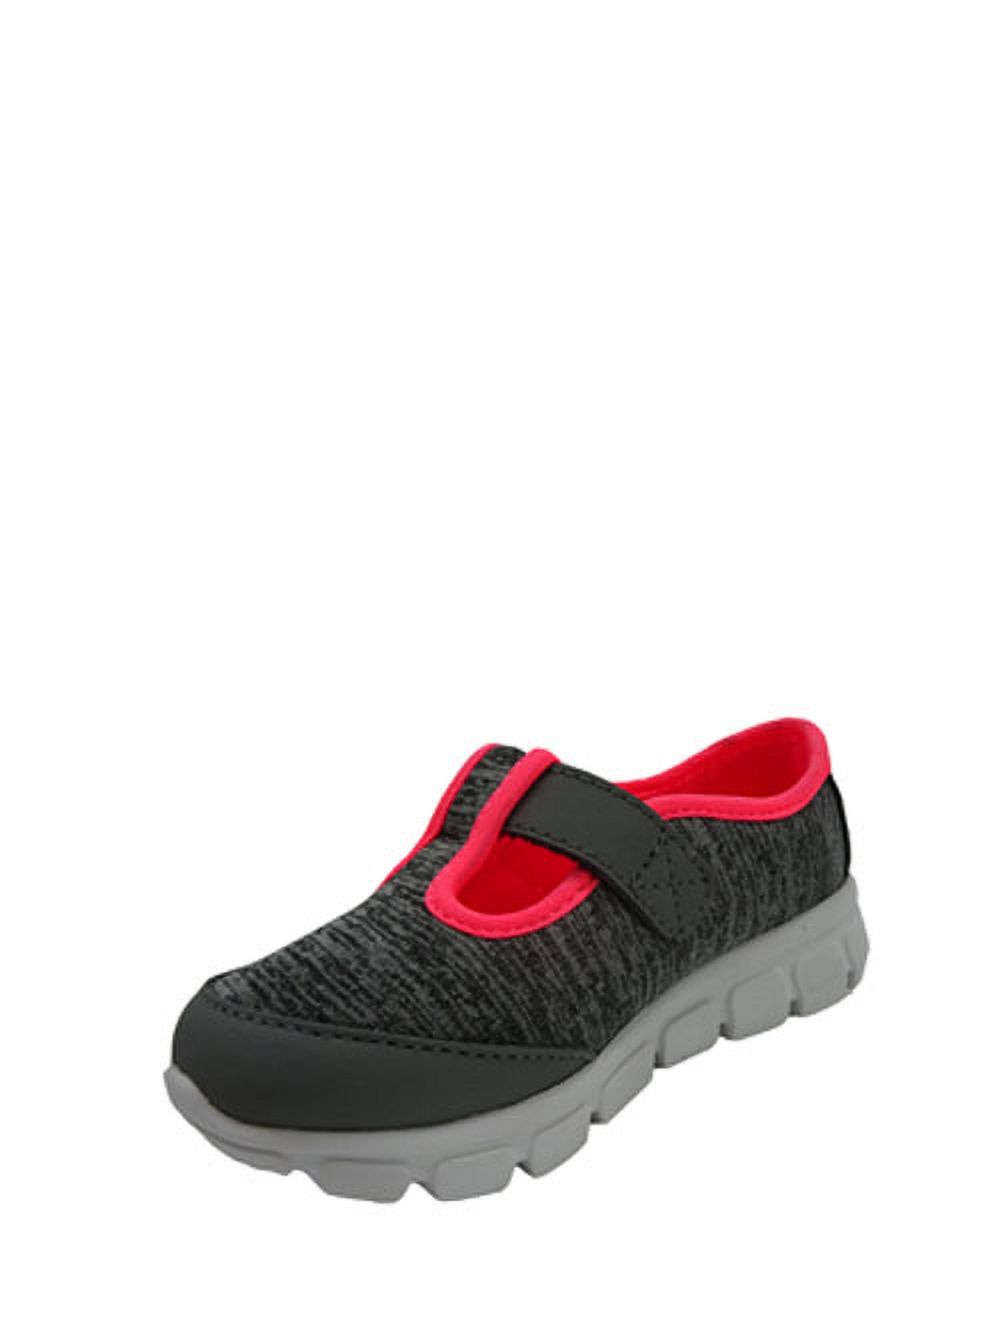 Athletic Works Toddler Girl's T-Strap Athletic Shoe - image 3 of 5